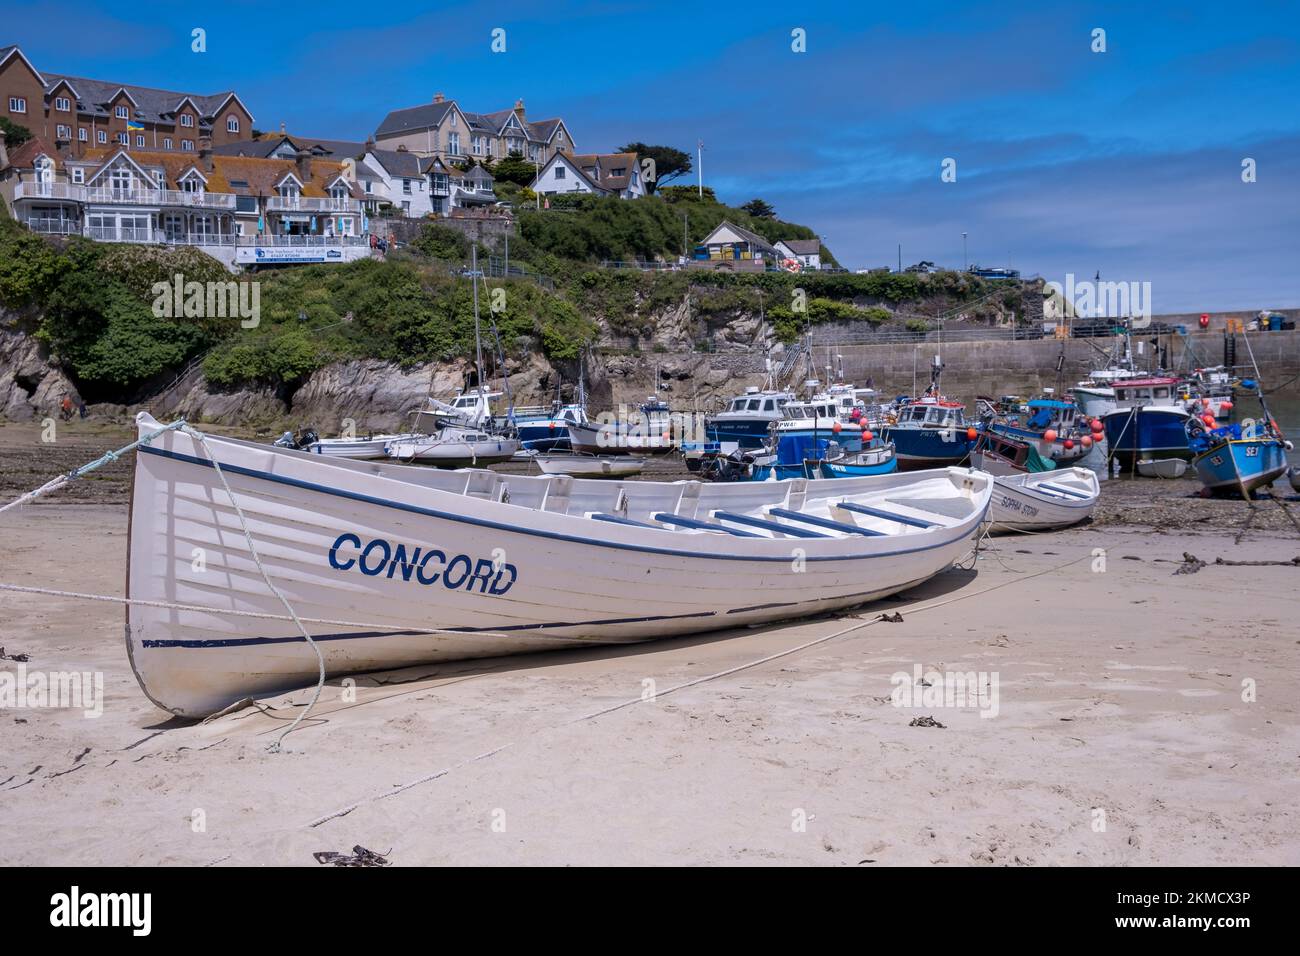 Newquay rowing boat named Concord in Newquay Harbour, Cornwall, UK Stock Photo